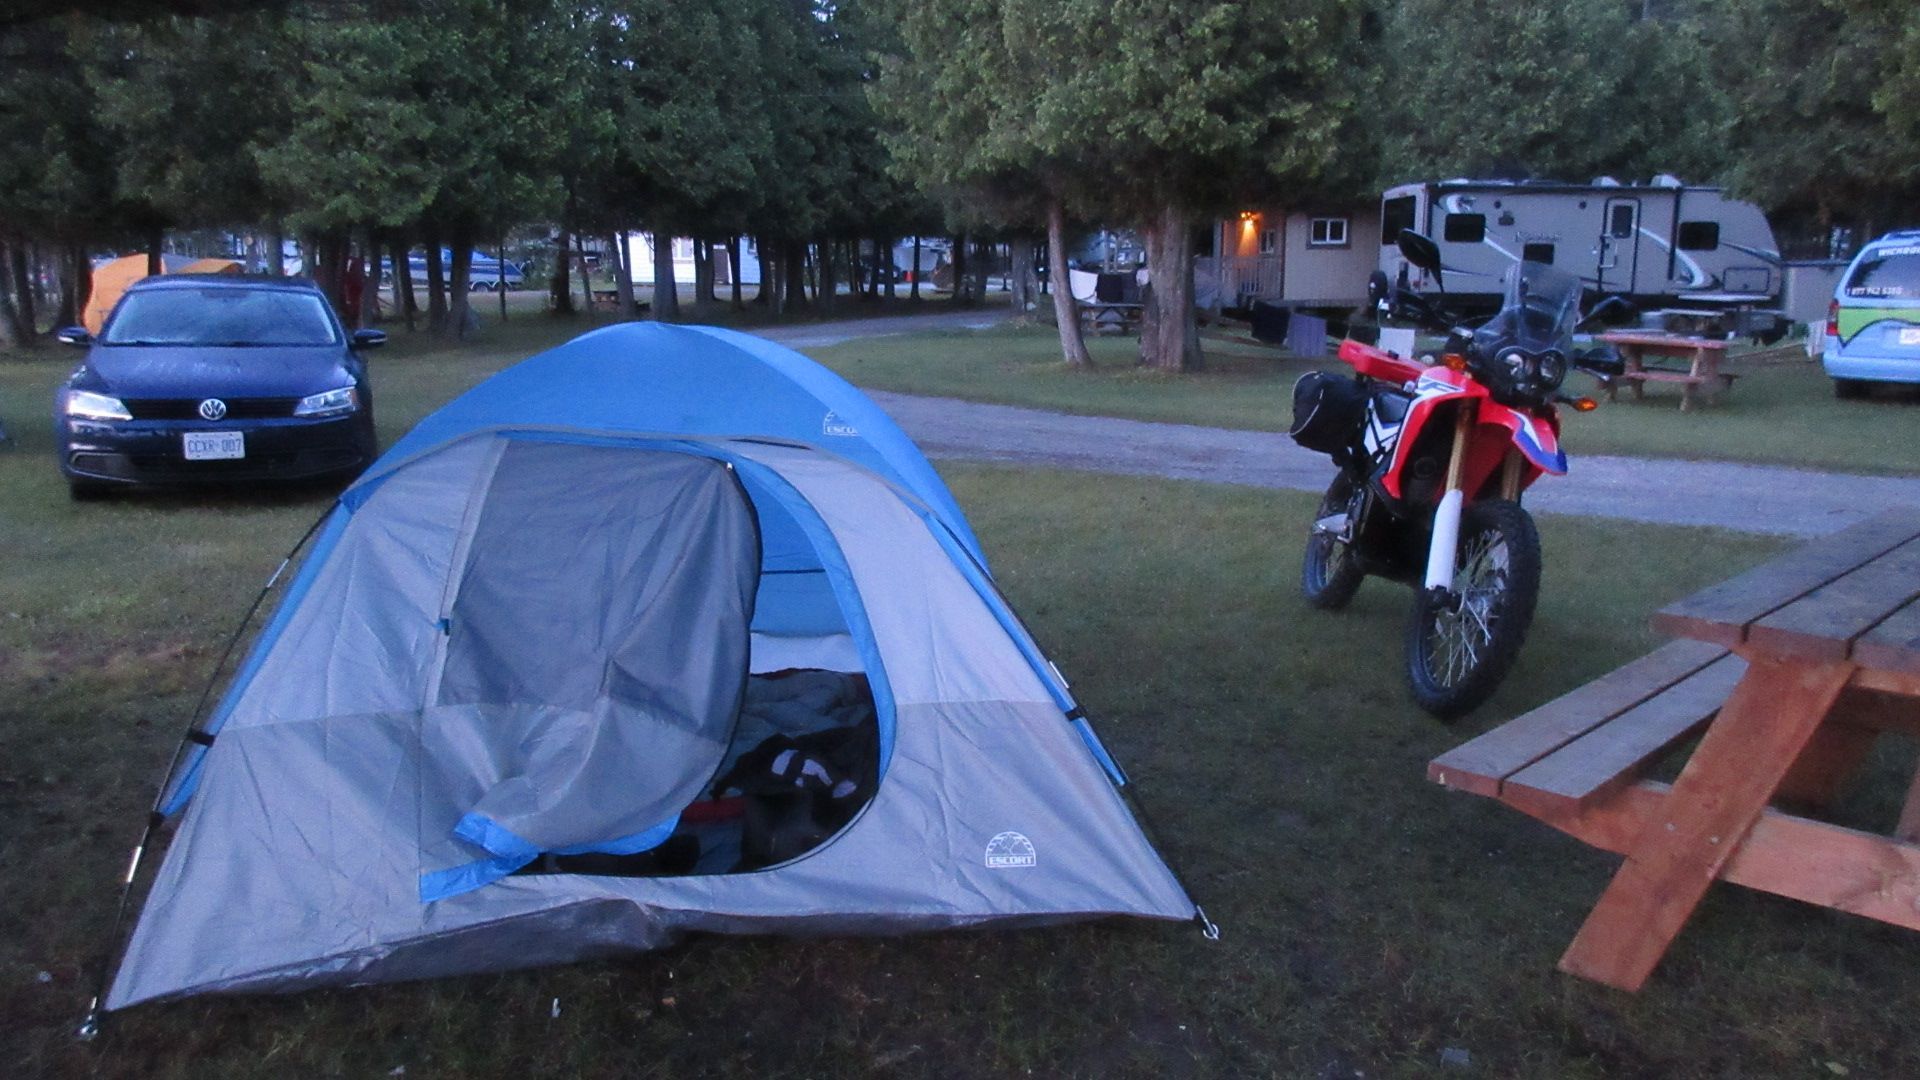 Proof that I motorcycle camped (or tented anyway)